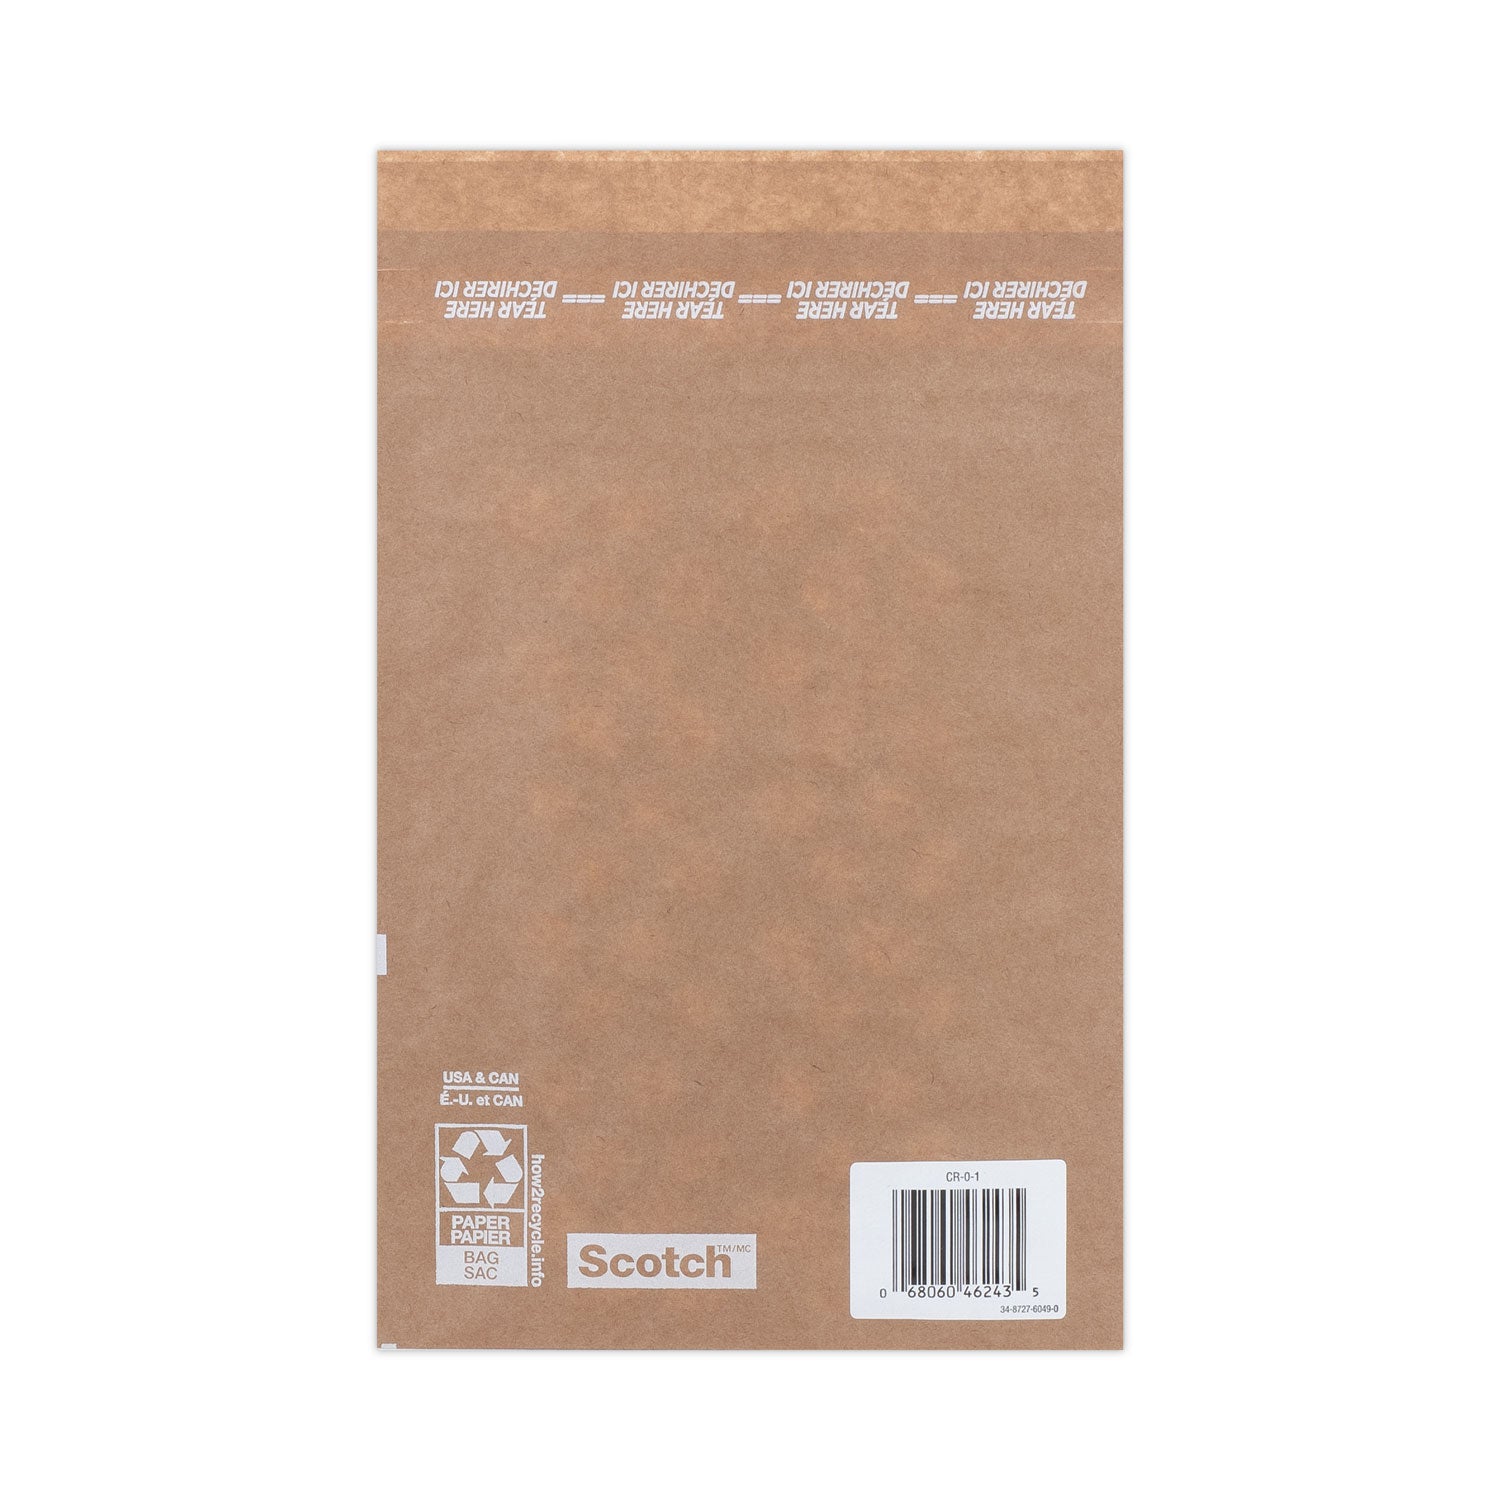 curbside-recyclable-padded-mailer-#0-bubble-cushion-self-adhesive-closure-7-x-1125-natural-kraft-100-carton_mmmcr01 - 4